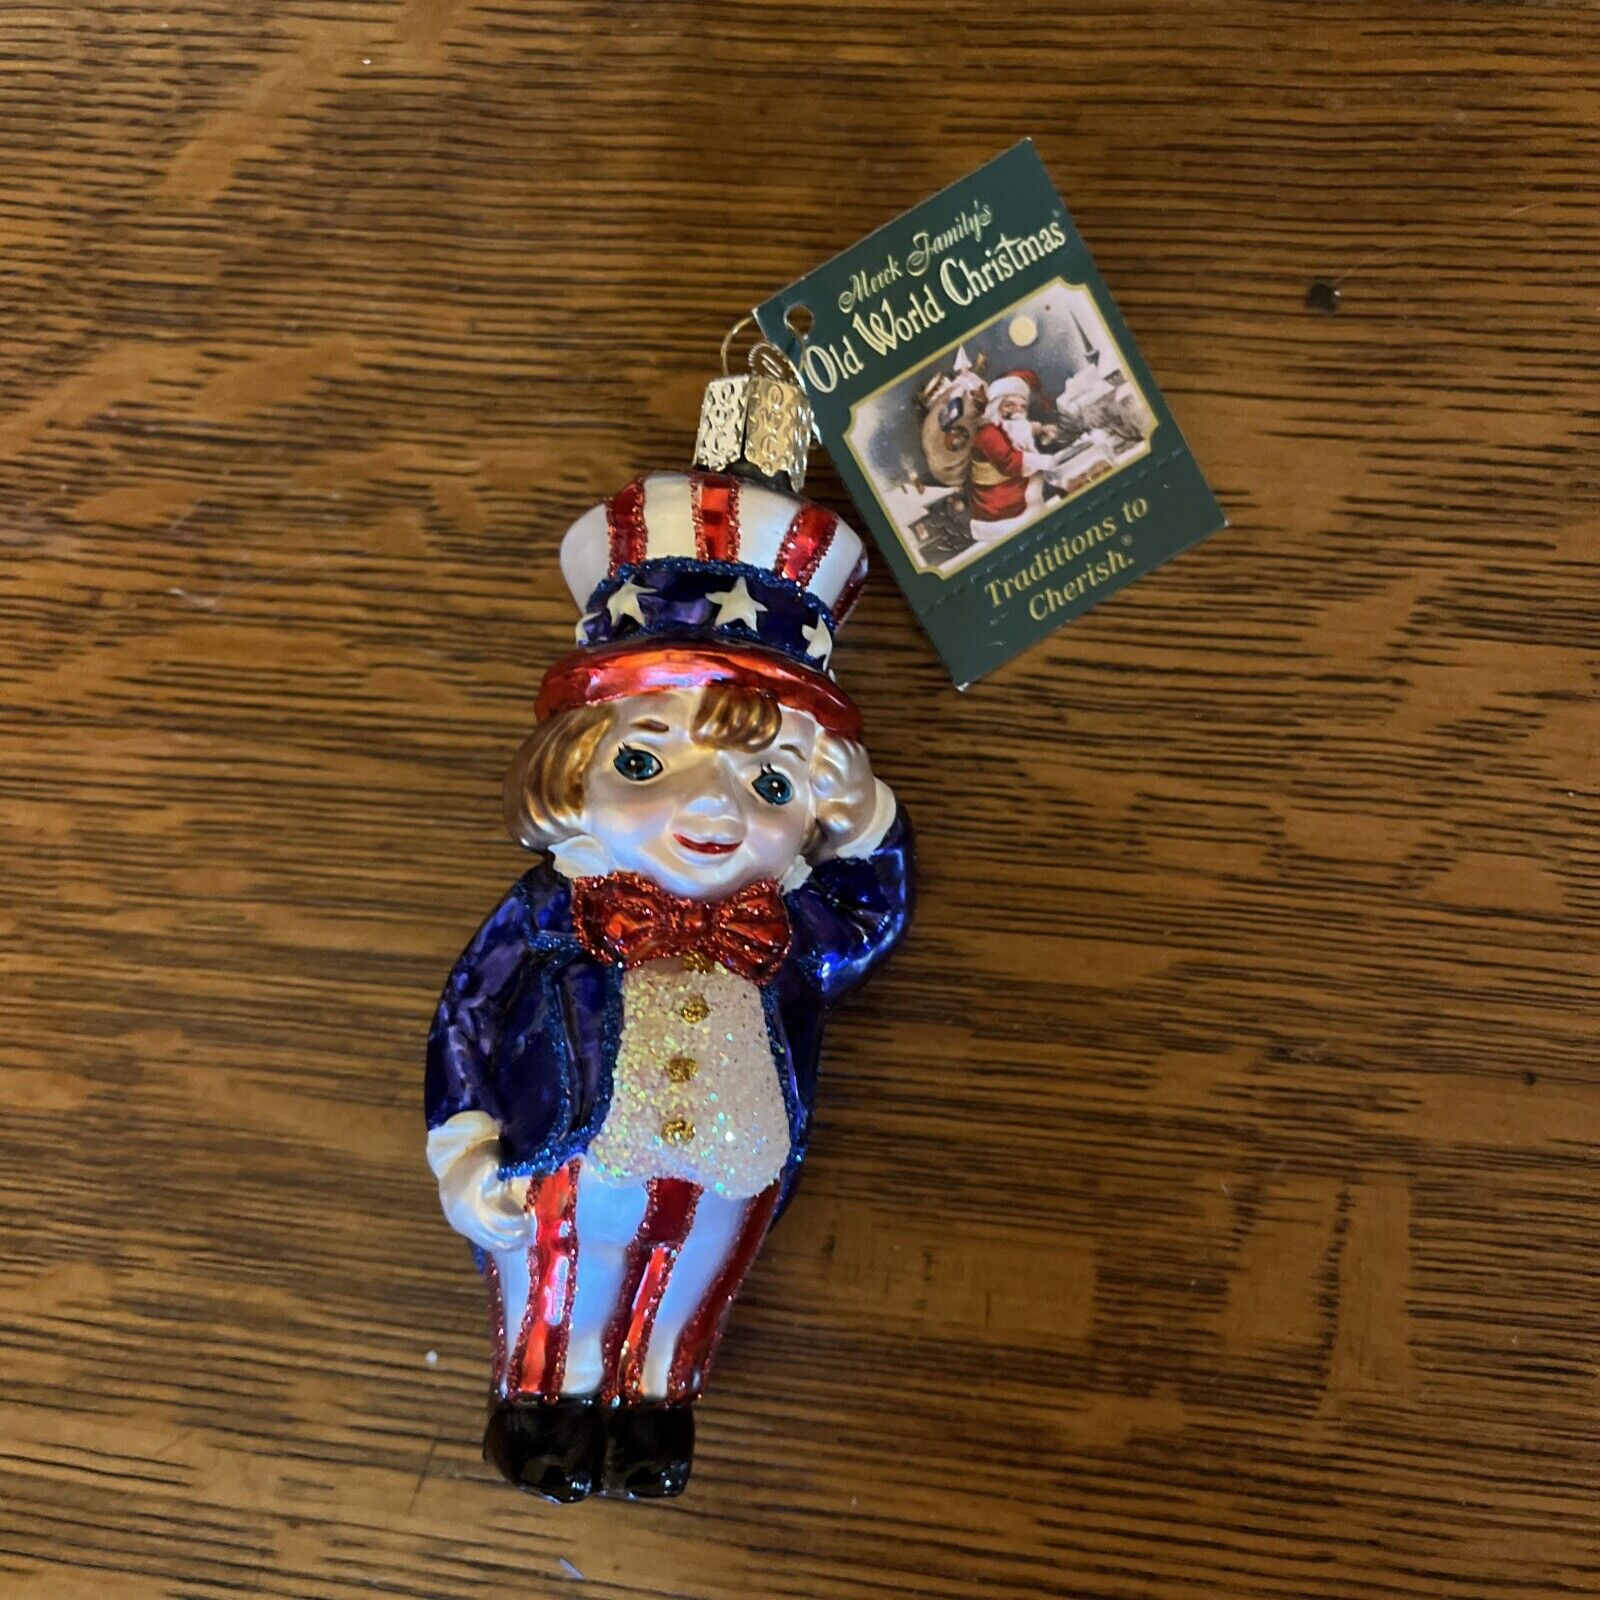 Old World Christmas Patriotic Yankee Doodle 4th of July Glass Ornament 2003